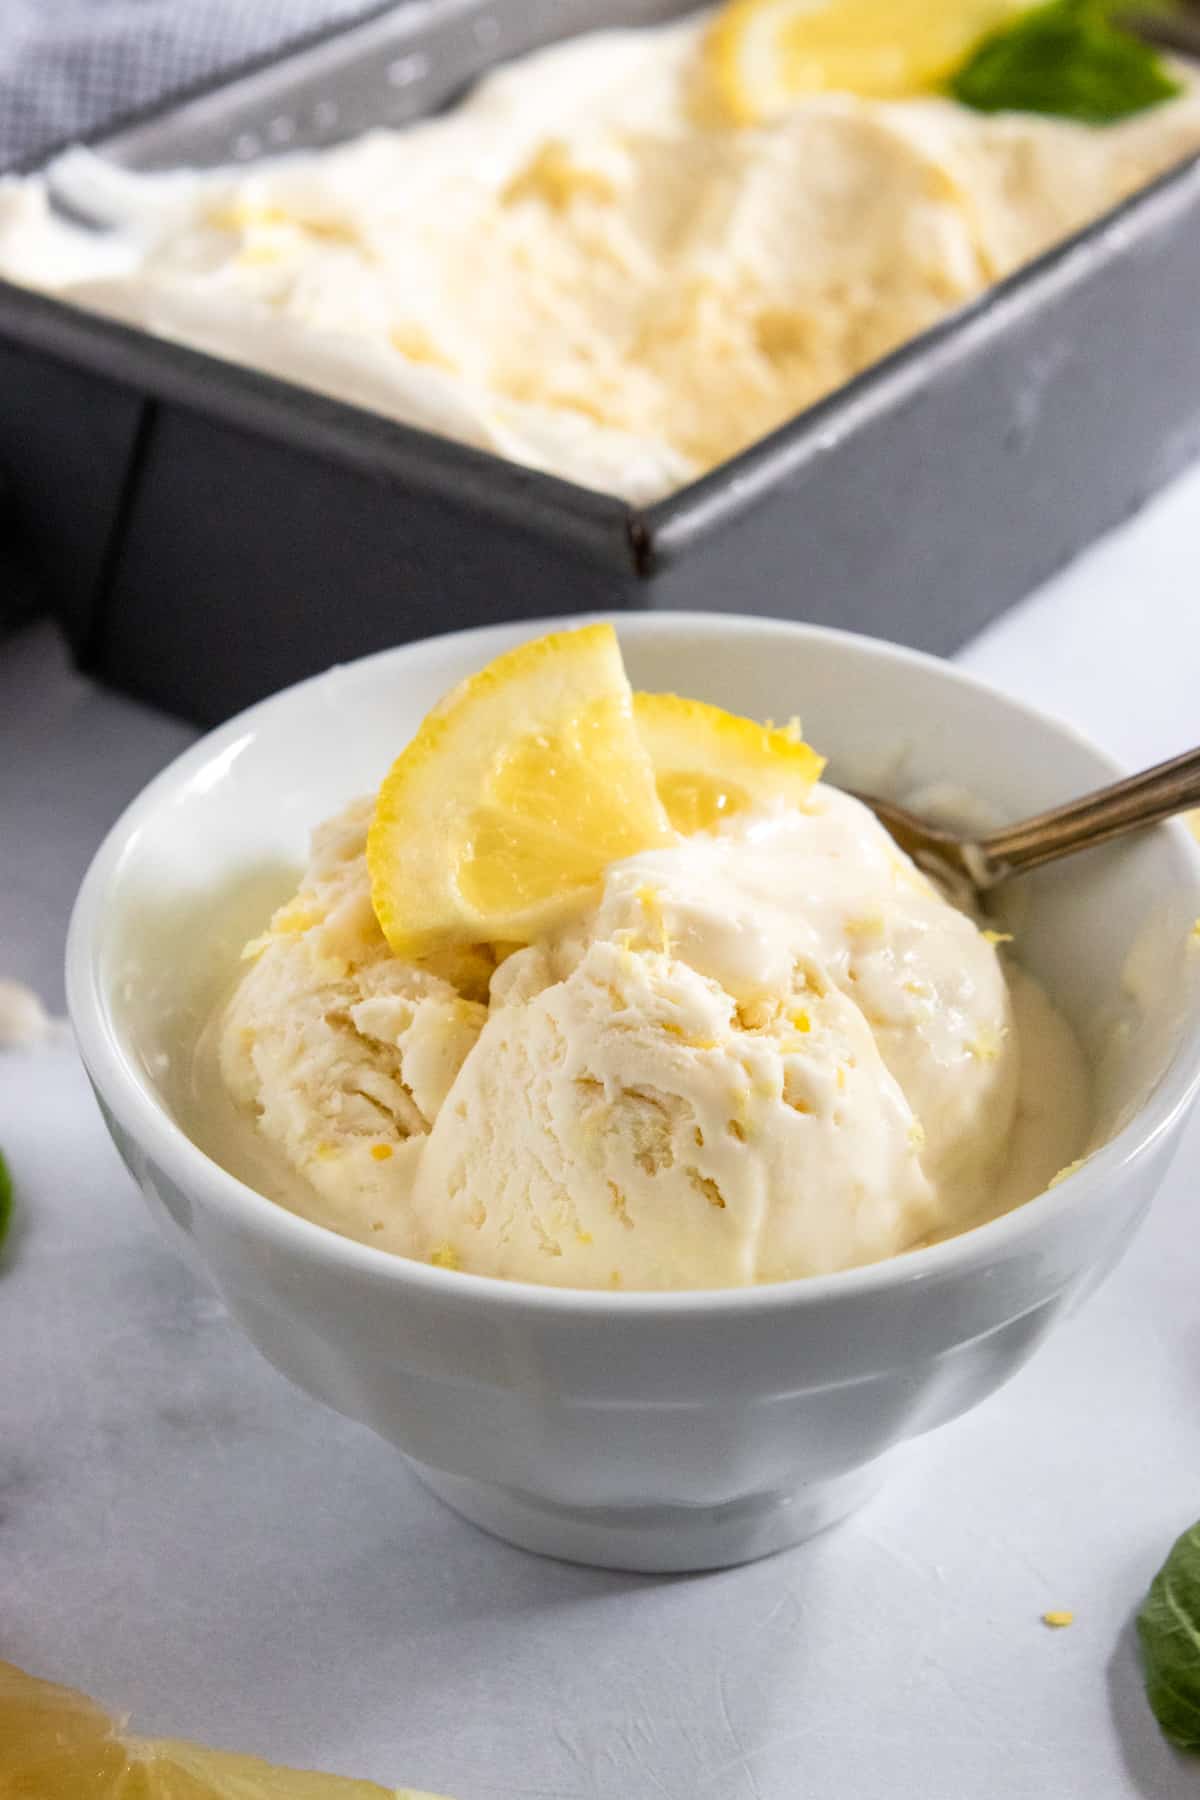 Lemon ice cream in white bowl with lemon wedges and ice cream container behind it.